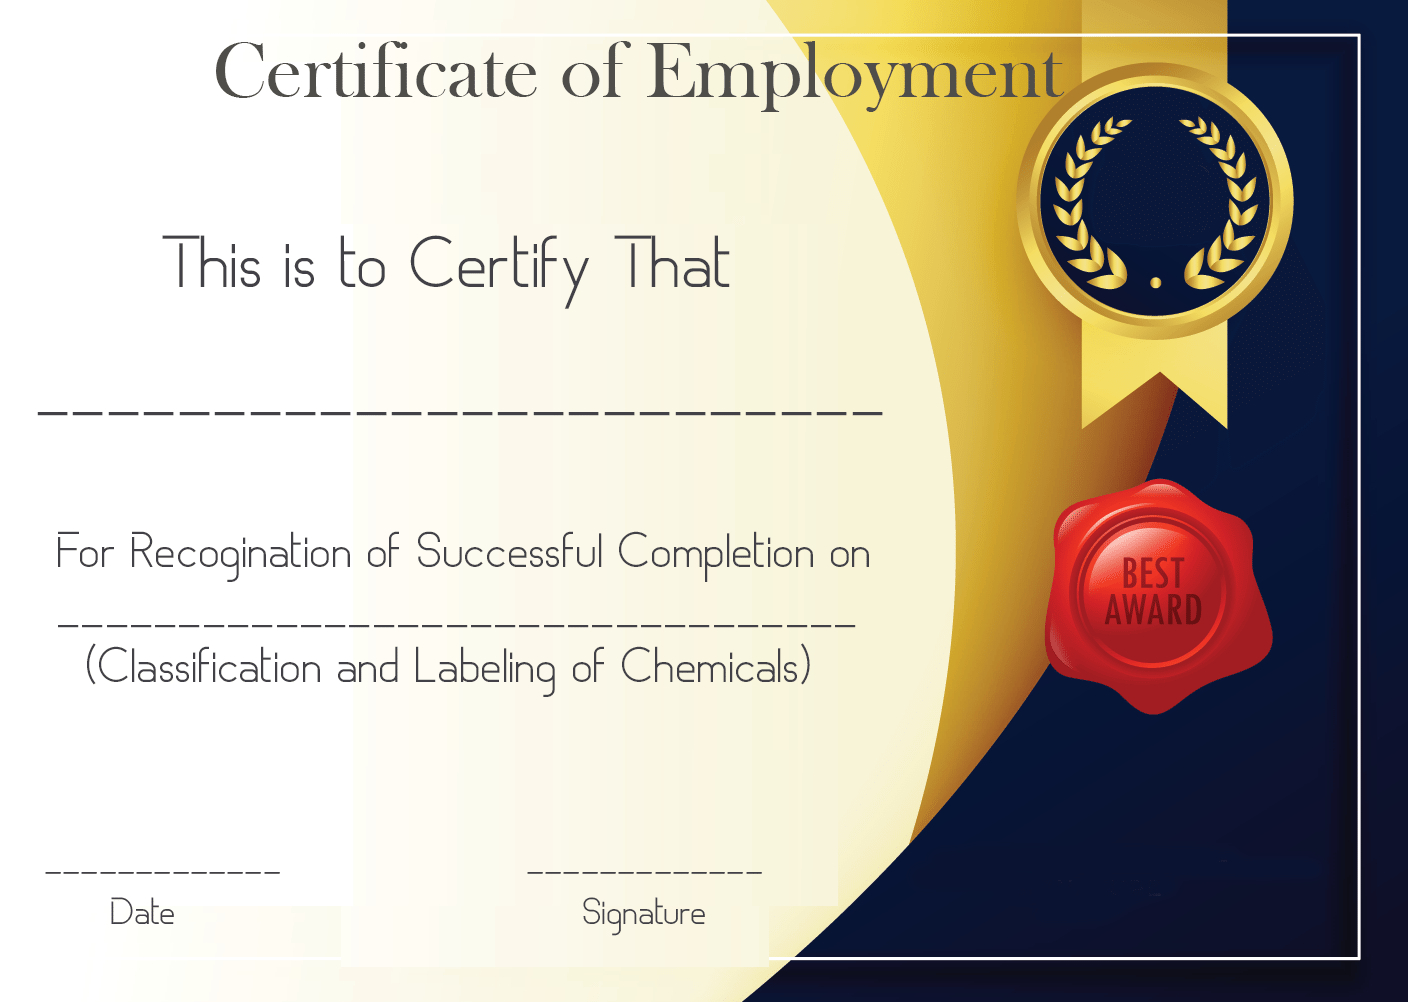 Free Sample Certificate Of Employment Template | Certificate Regarding Good Job Certificate Template